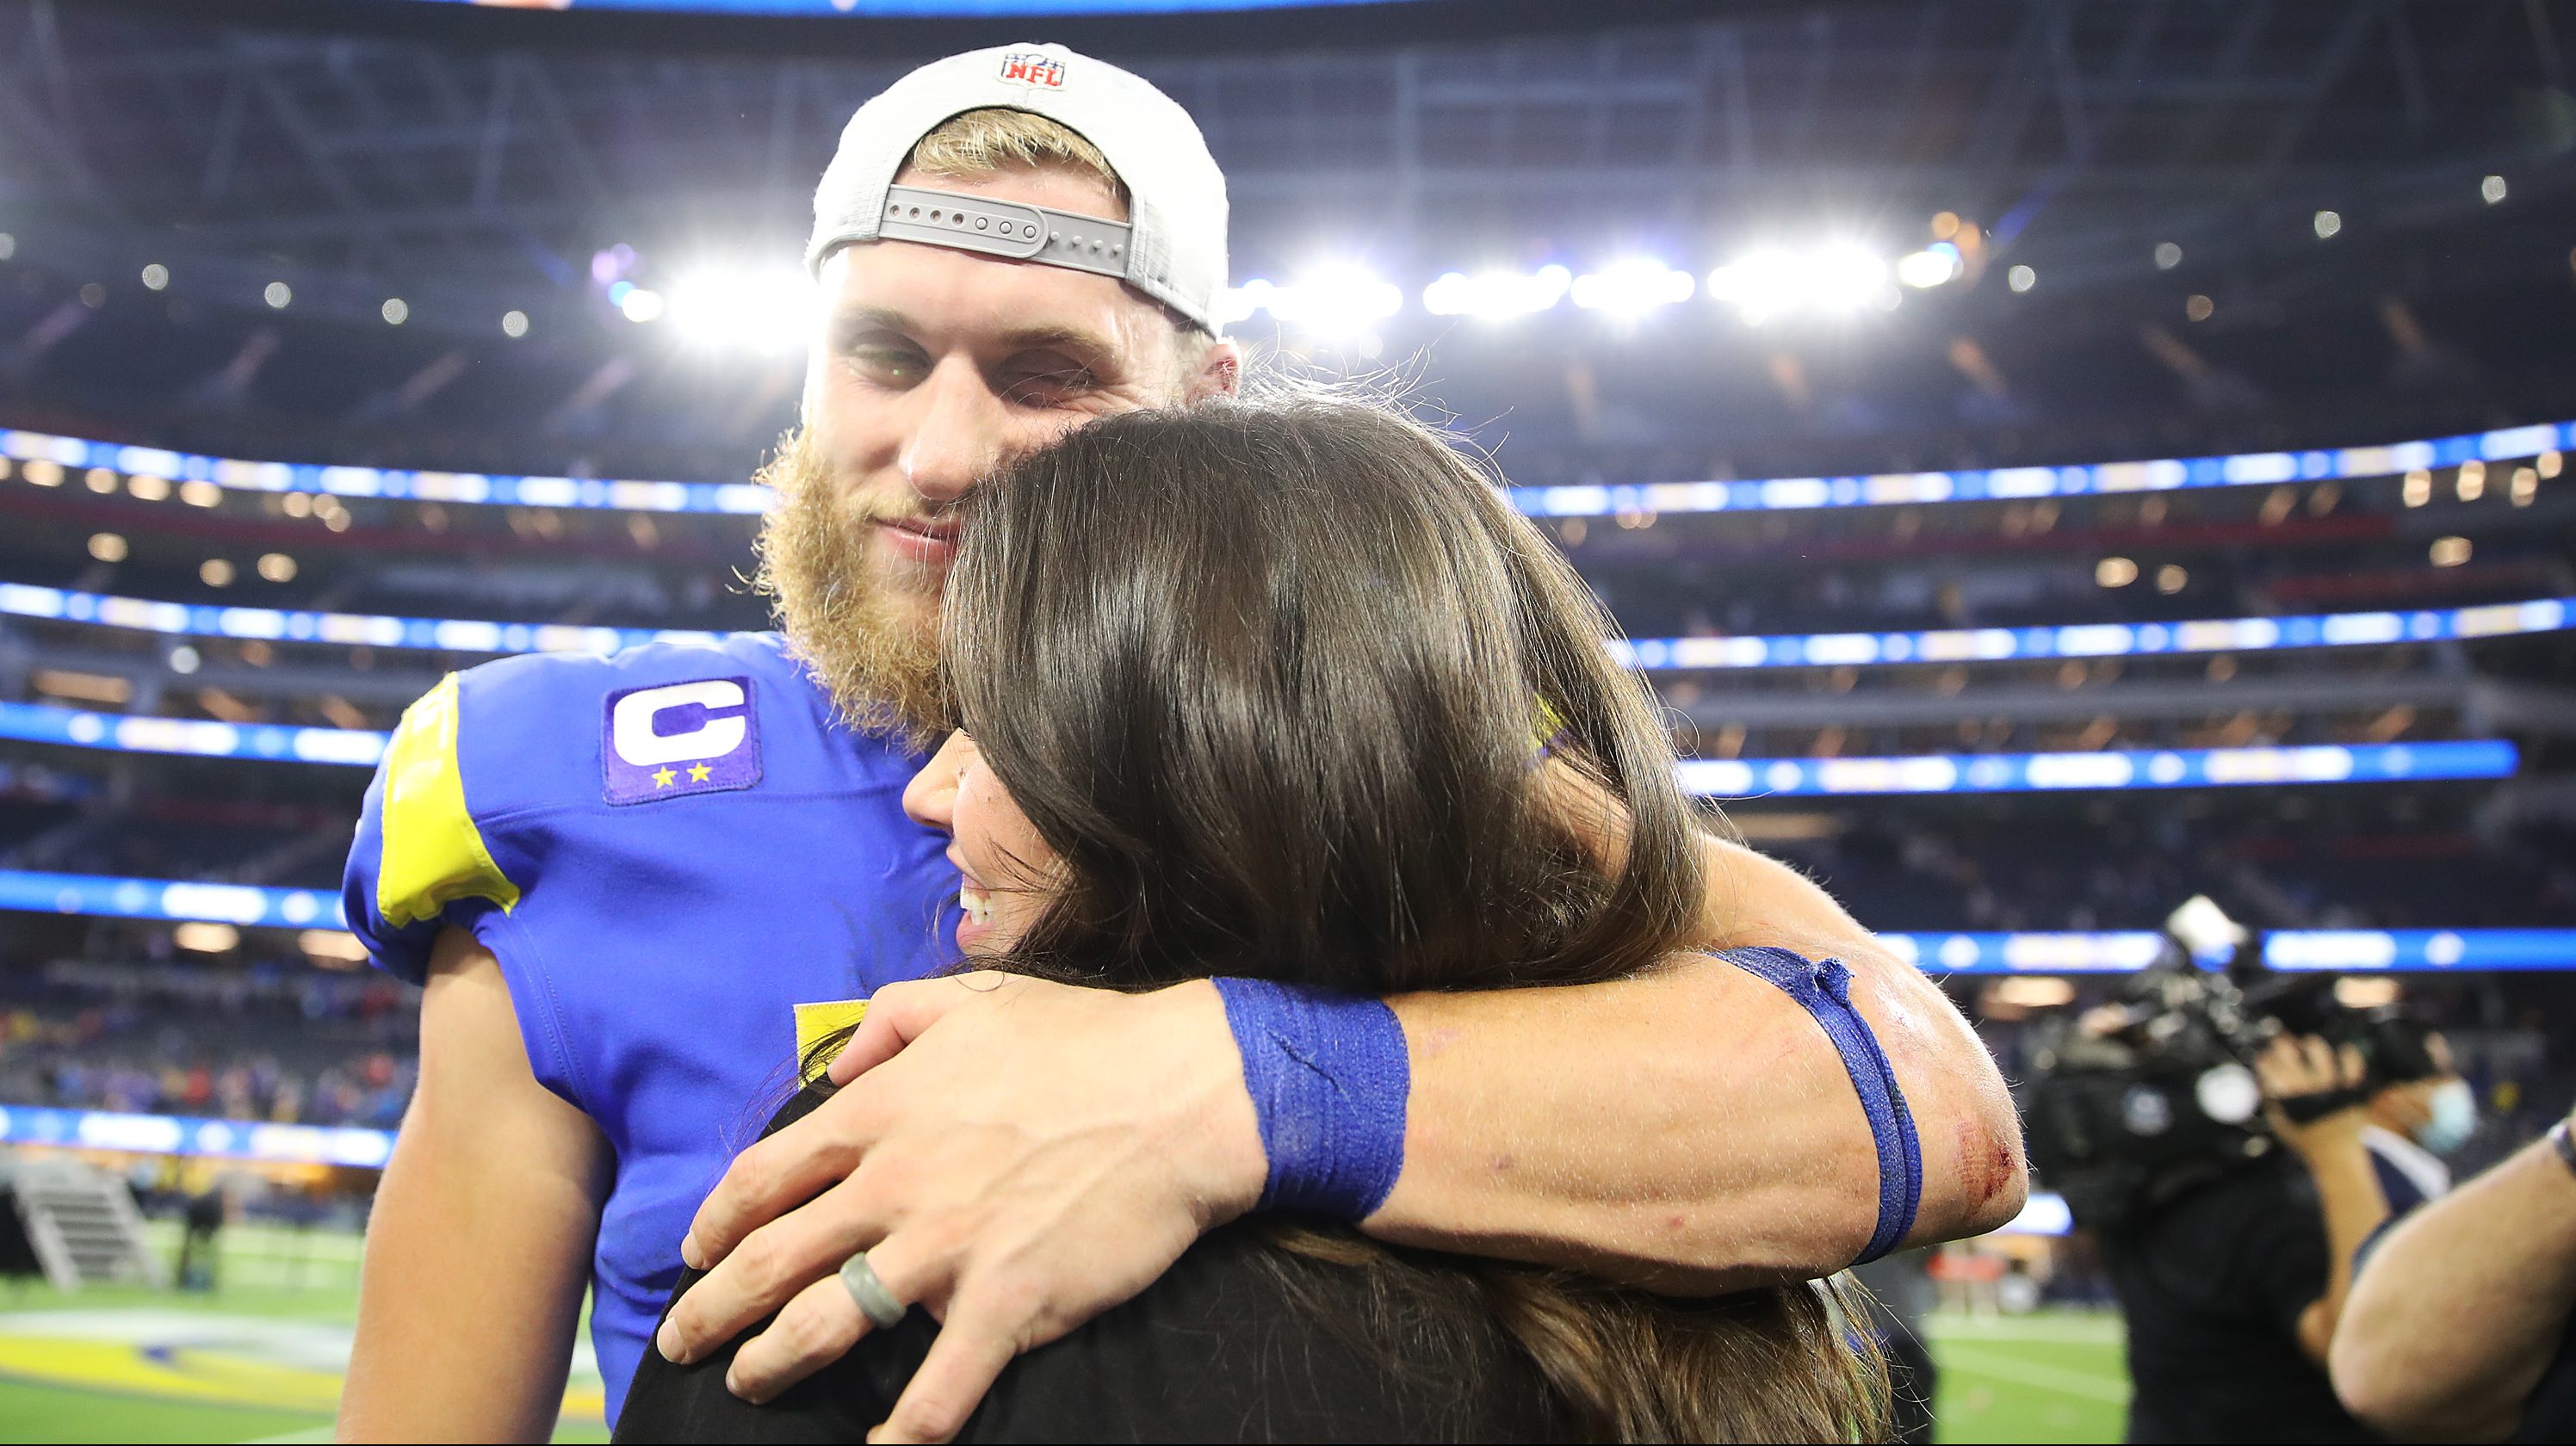 Cooper Kupp's Wife Anna is the Reason He Became an NFL Superstar